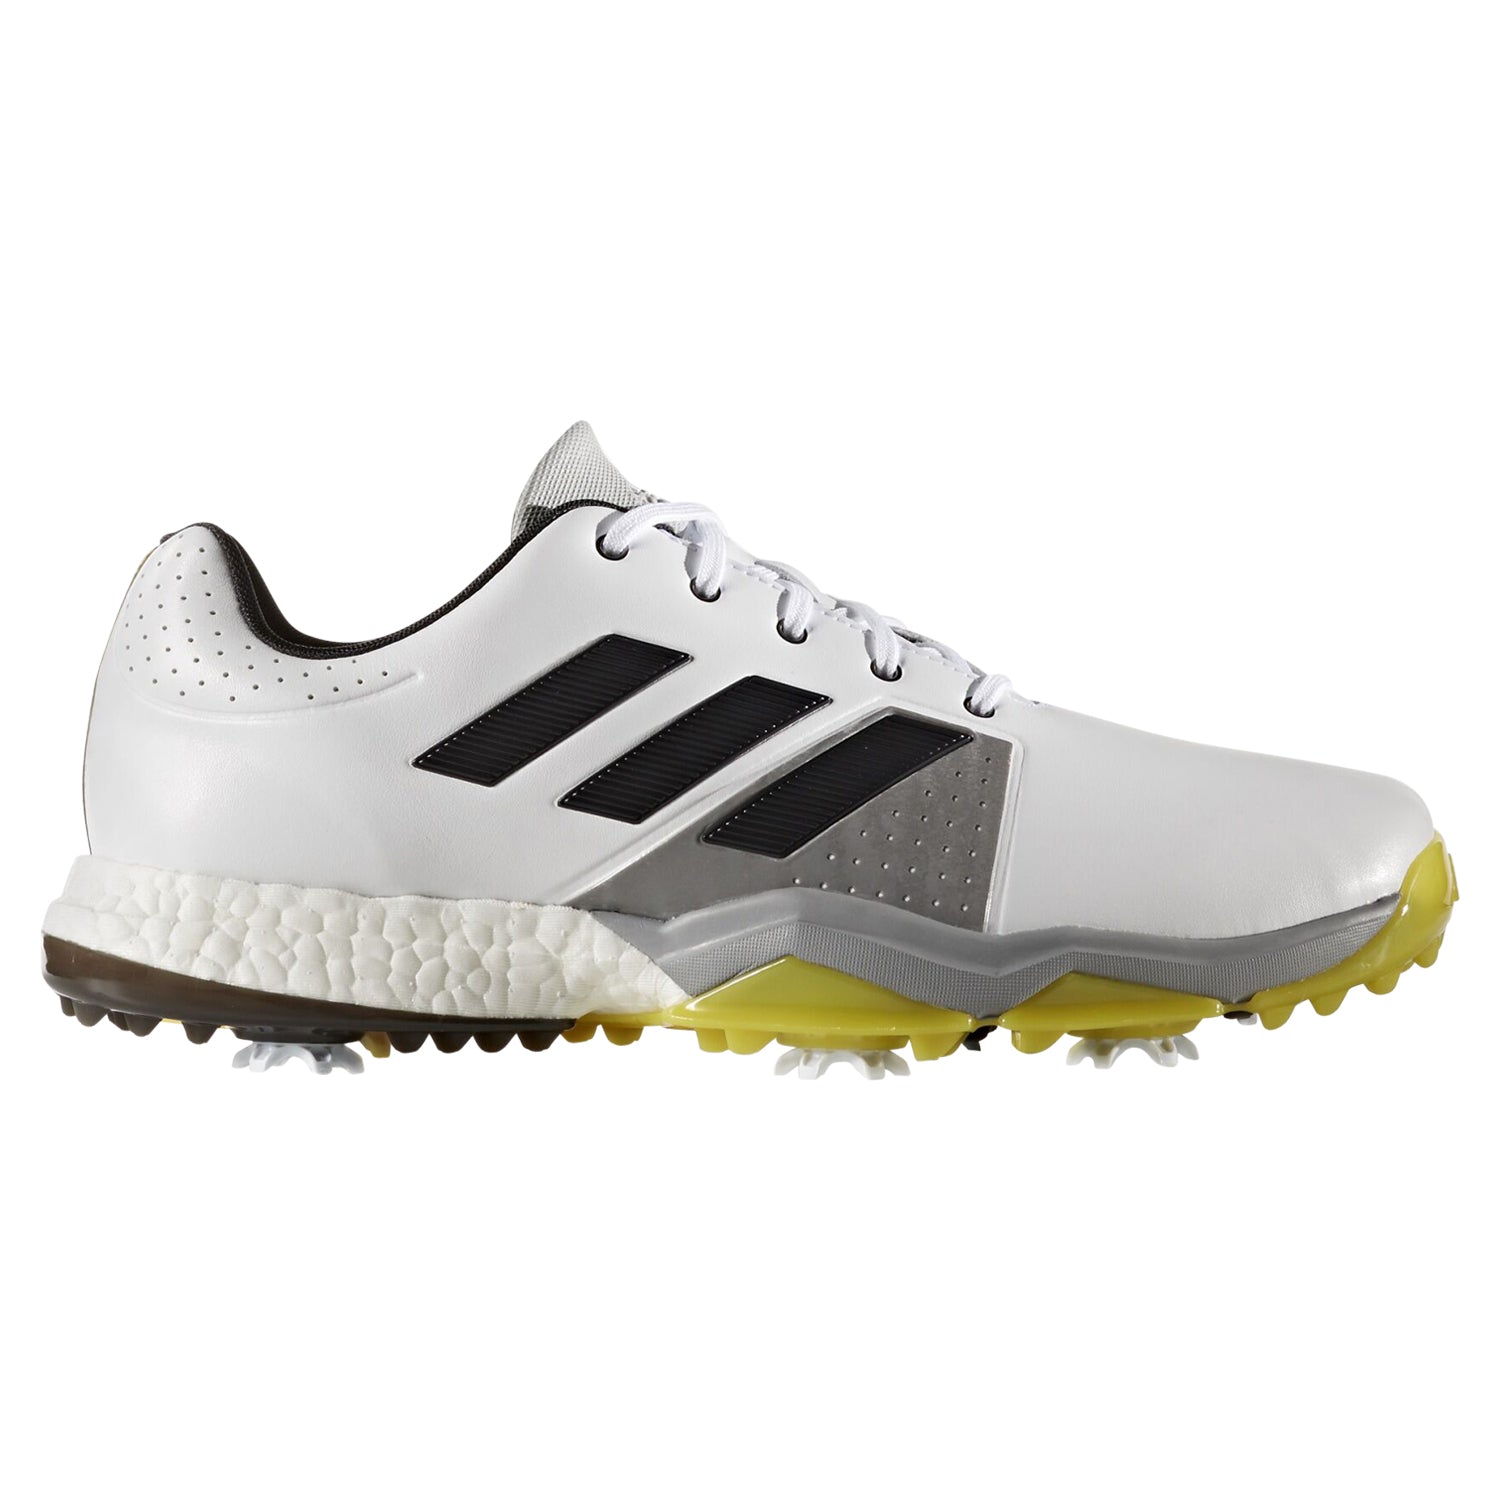 boost adidas golf shoes